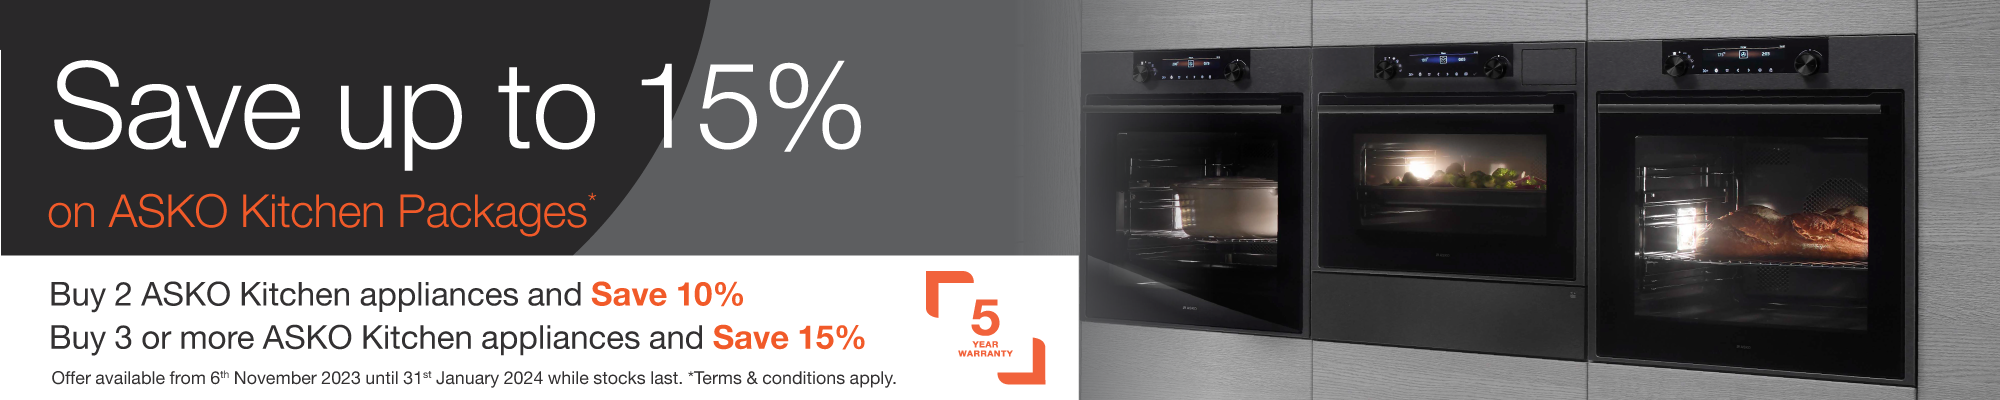 Save Up To 15% On ASKO Kitchen Packages*